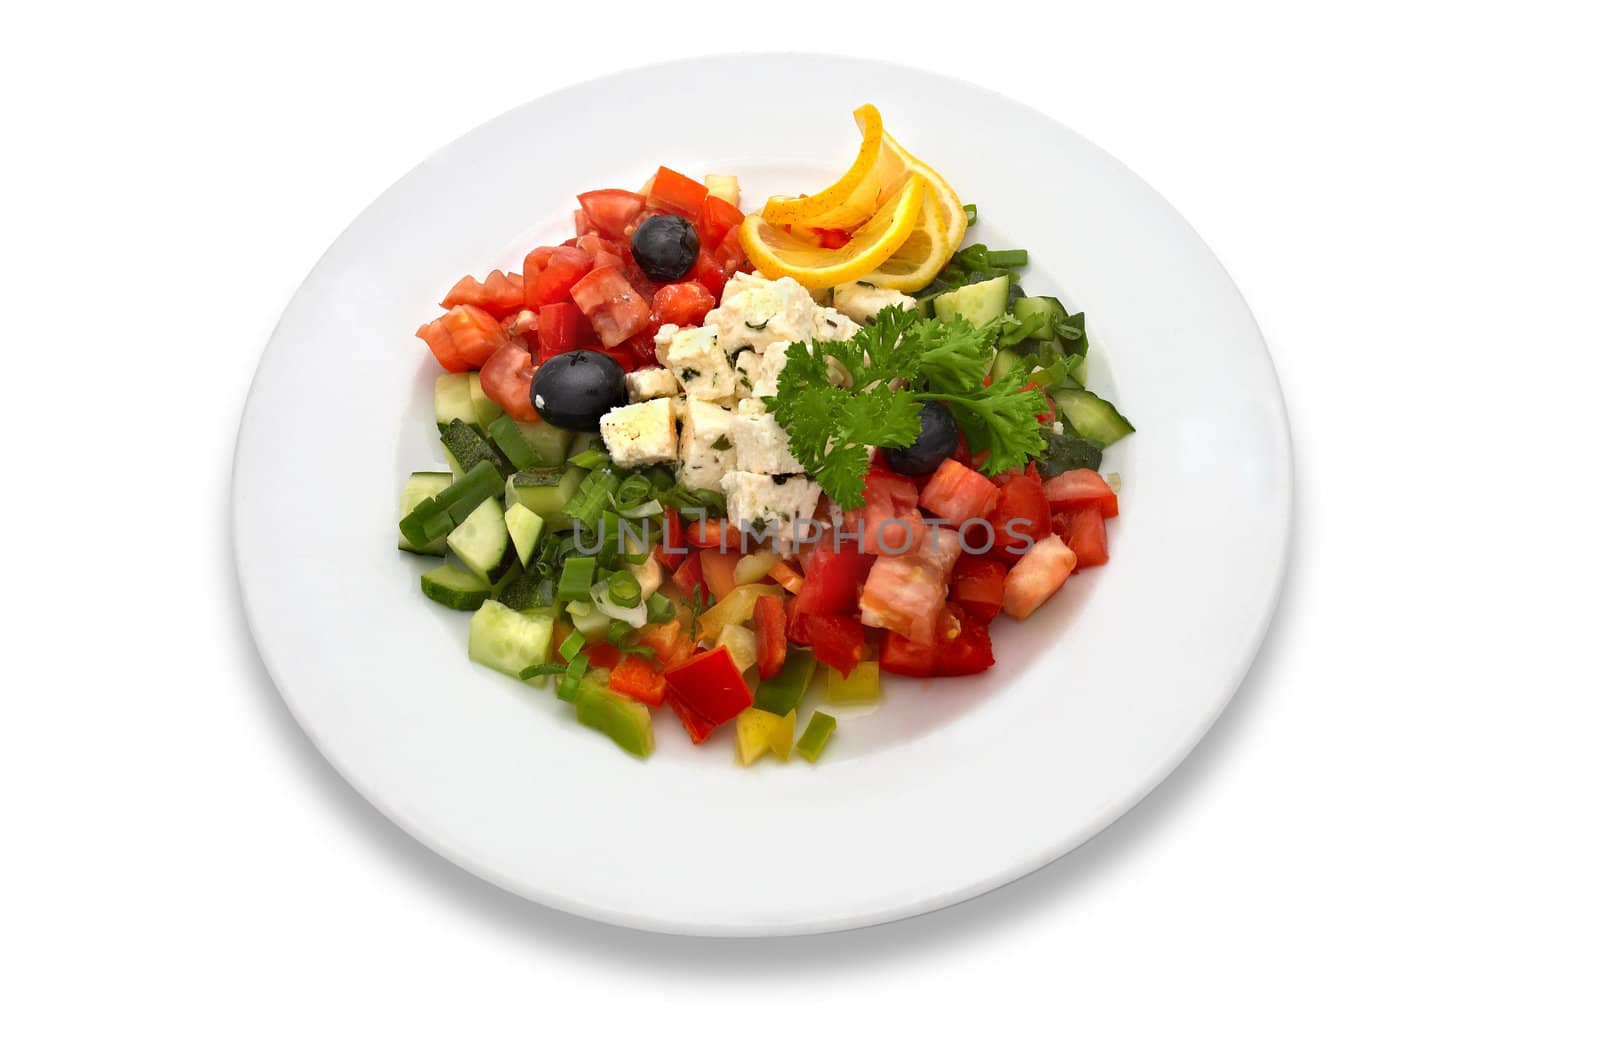 Salad made of fresh tomatoes, feta cheese, cucumbers, red peppers, lemon slices, olives and parsley. 